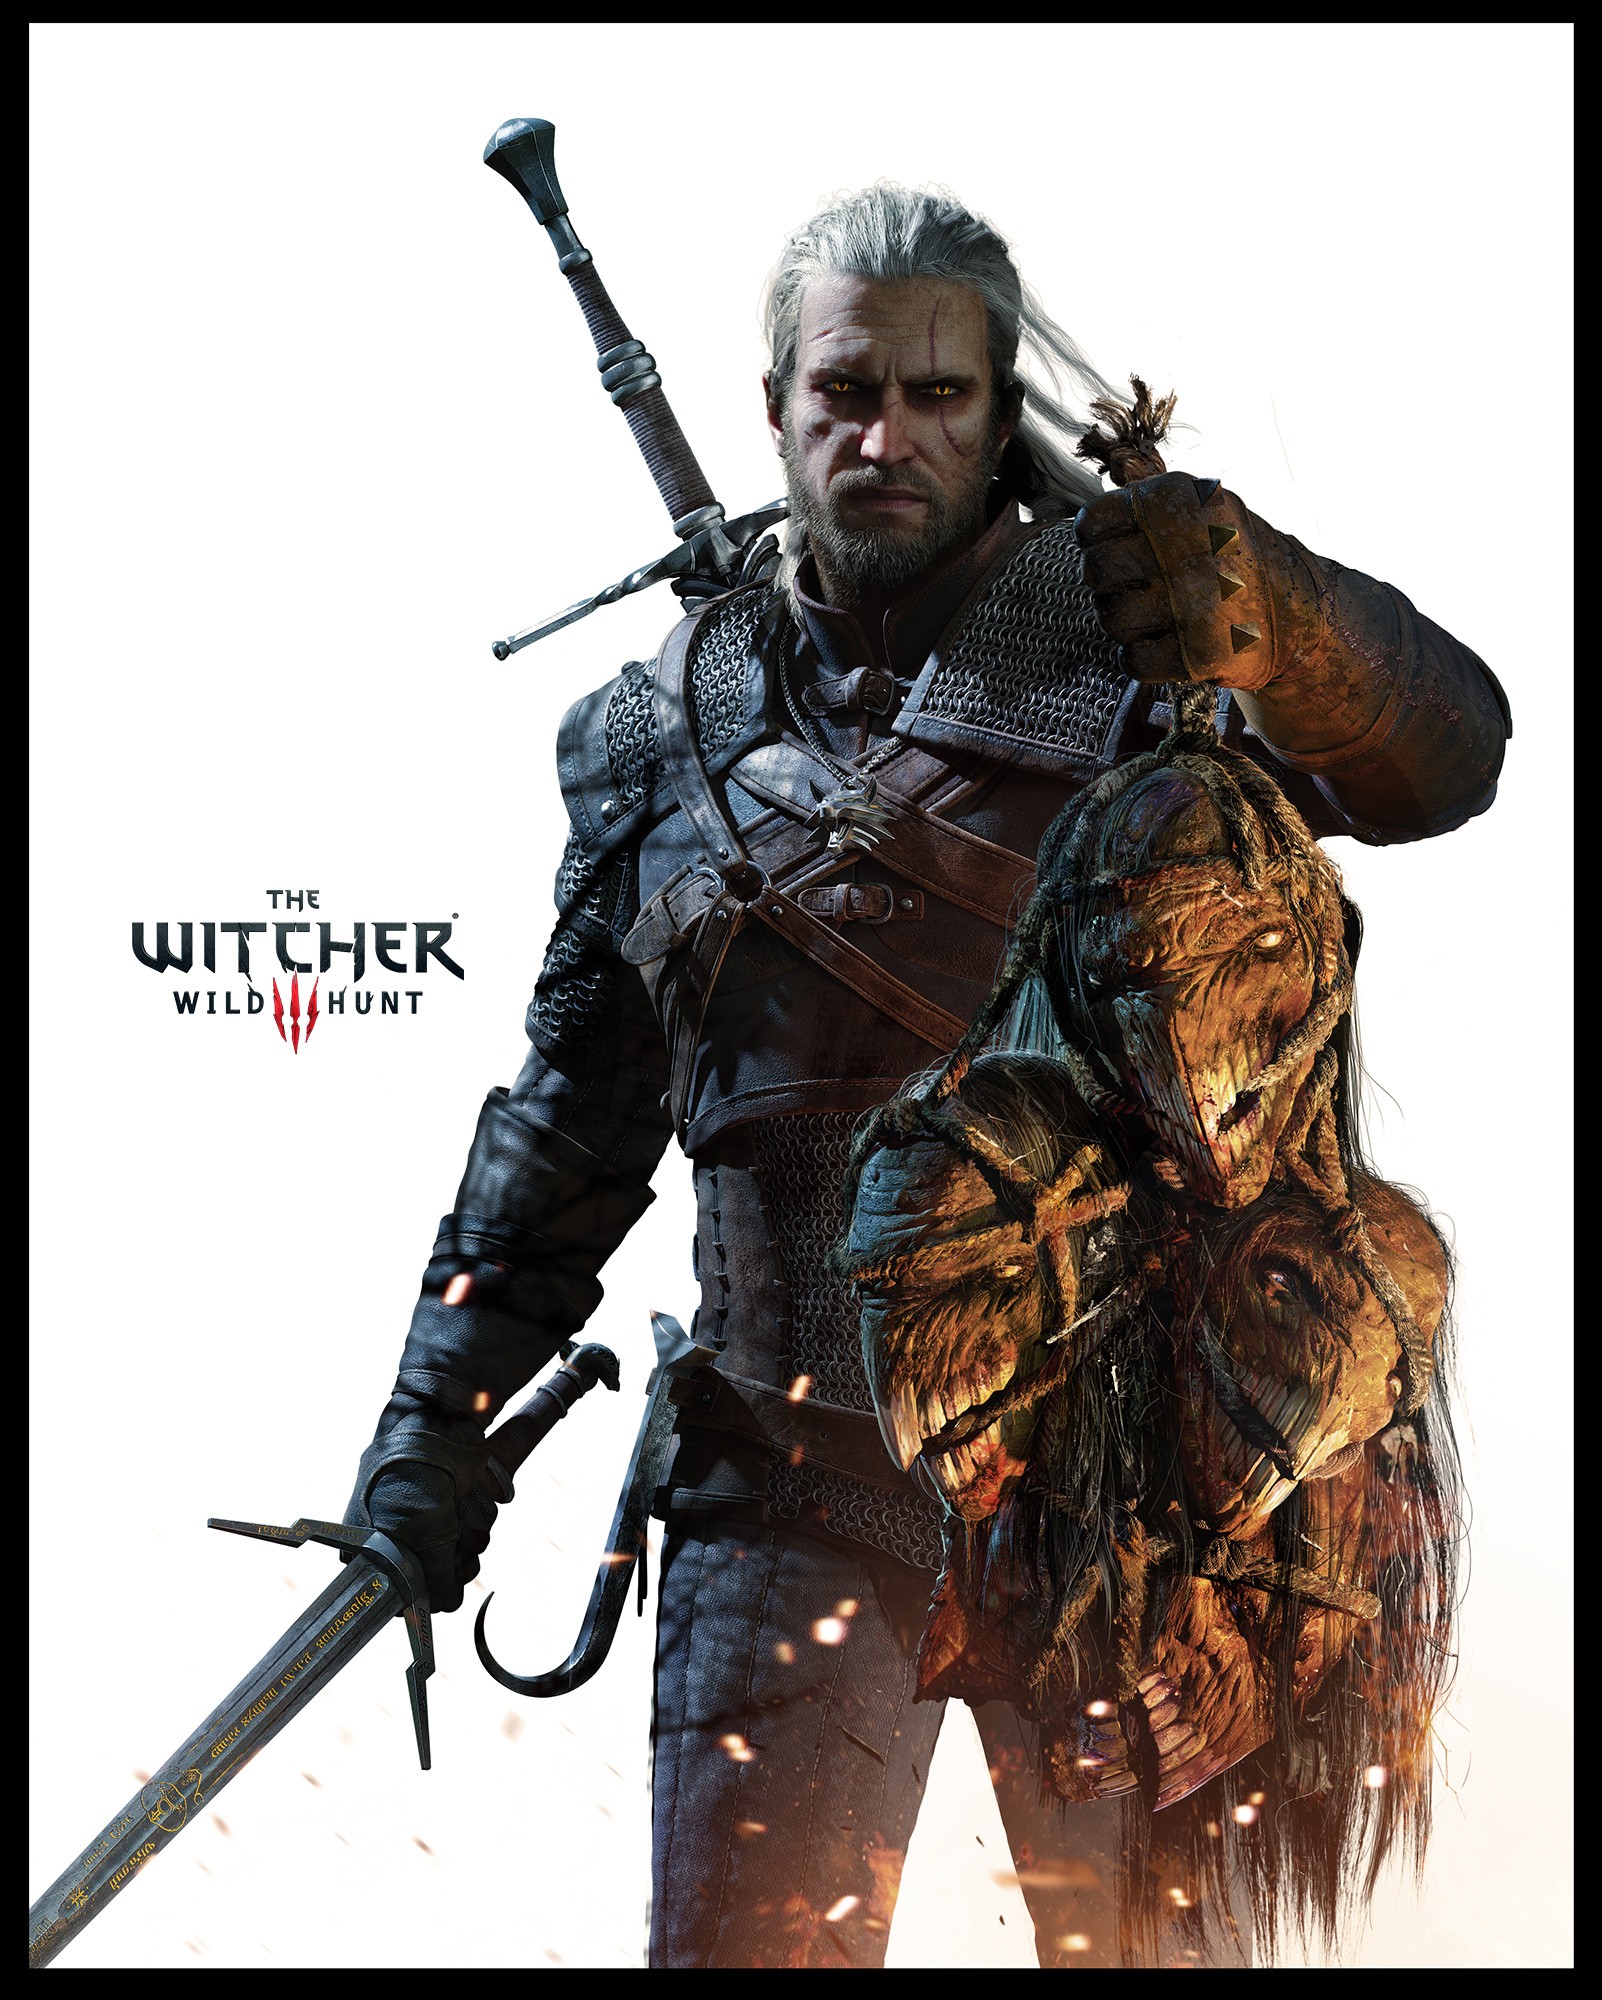 Geralt Of Rivia, The Witcher 3: Wild Hunt, PC Gaming, The Witcher Wallpaper